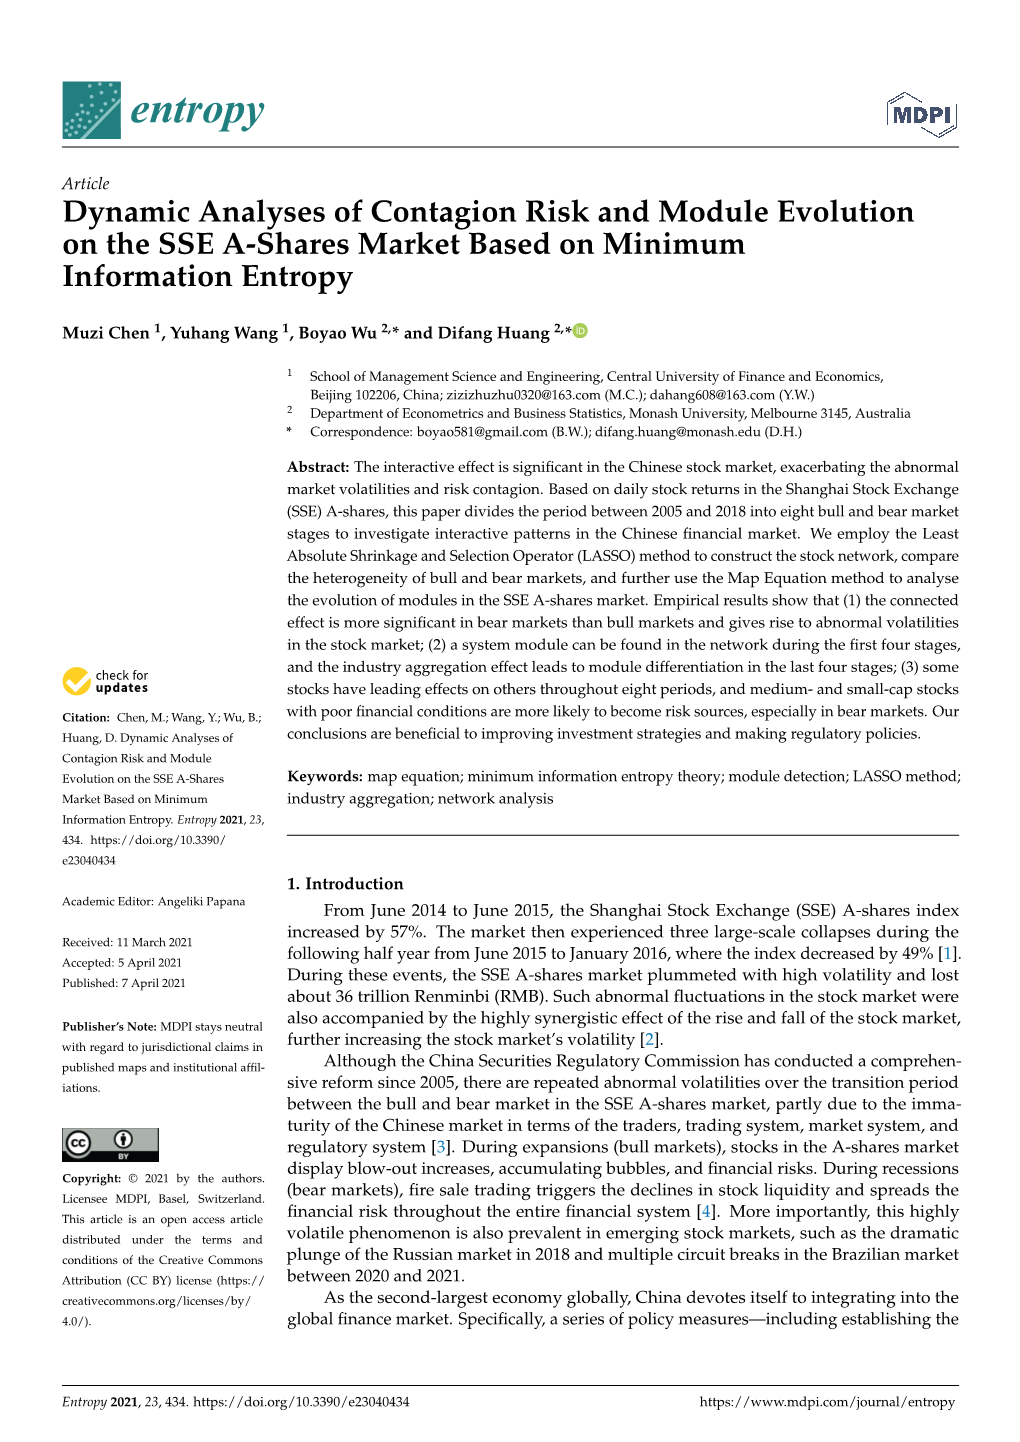 Dynamic Analyses of Contagion Risk and Module Evolution on the SSE A-Shares Market Based on Minimum Information Entropy